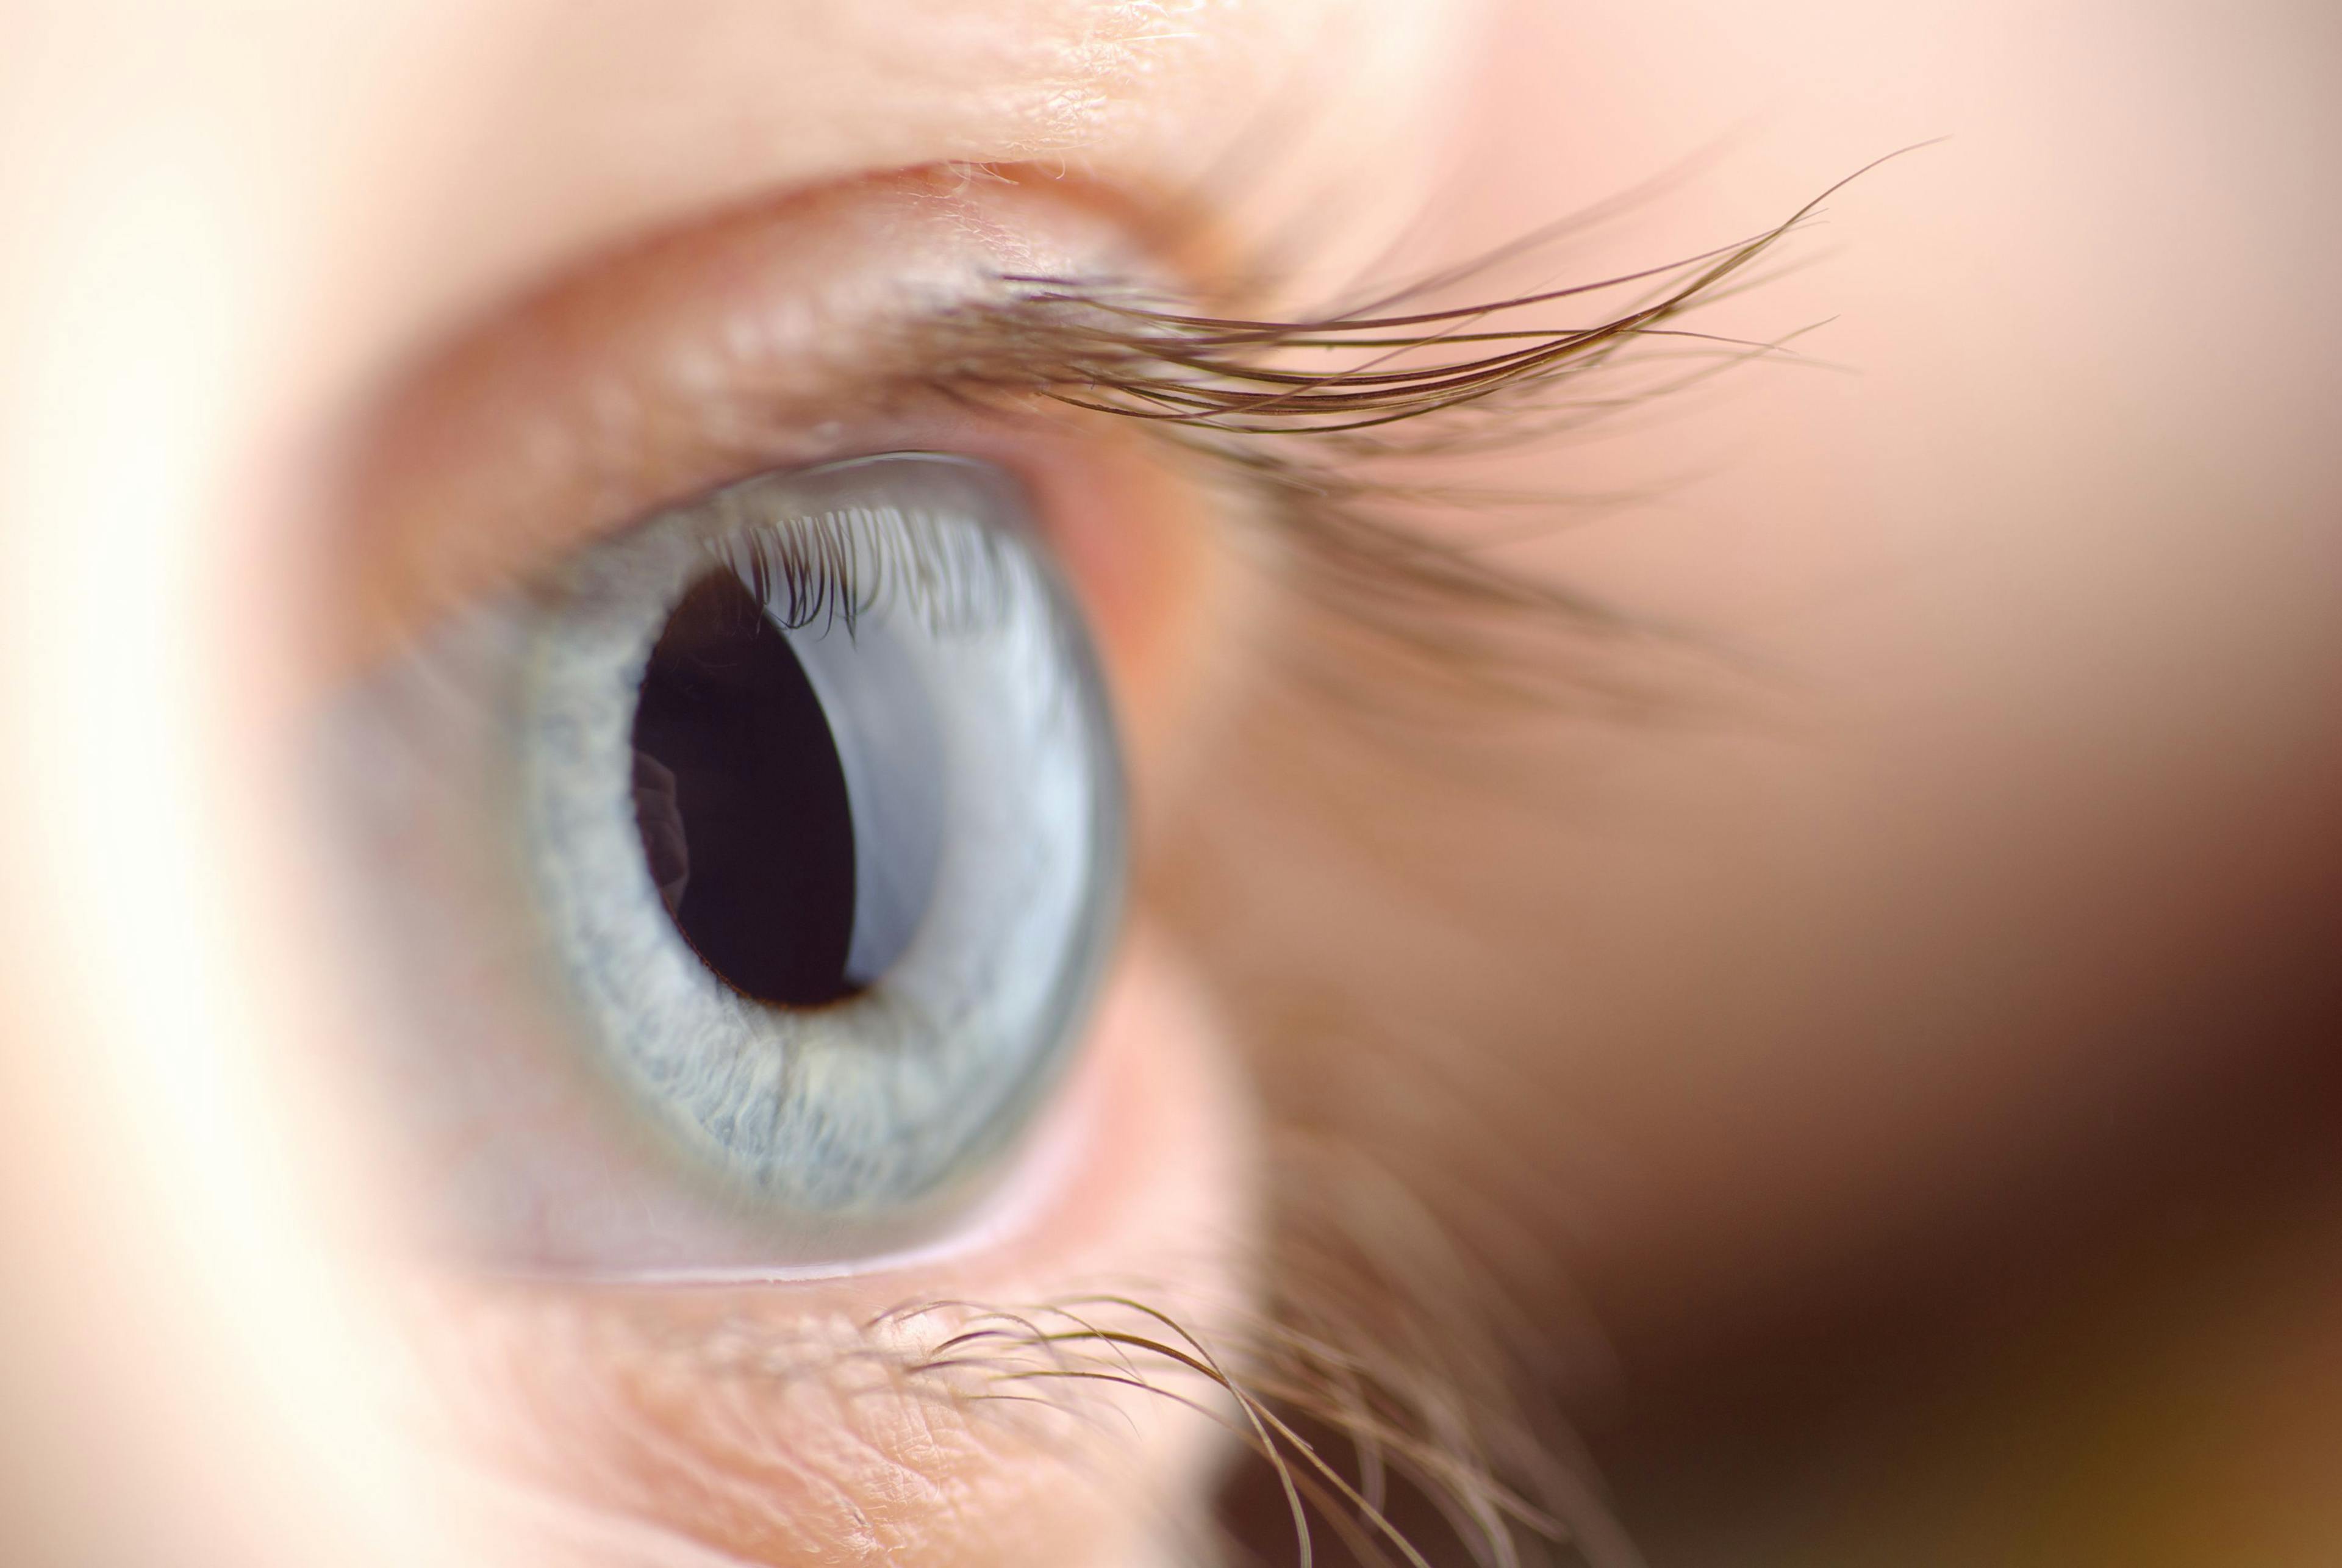 According to Aurion.Biotech, the innovation of this cell therapy is to enable fully differentiated corneal endothelial cells (CECs) to regenerate outside the body. (Image courtesy of Adobe Stock)